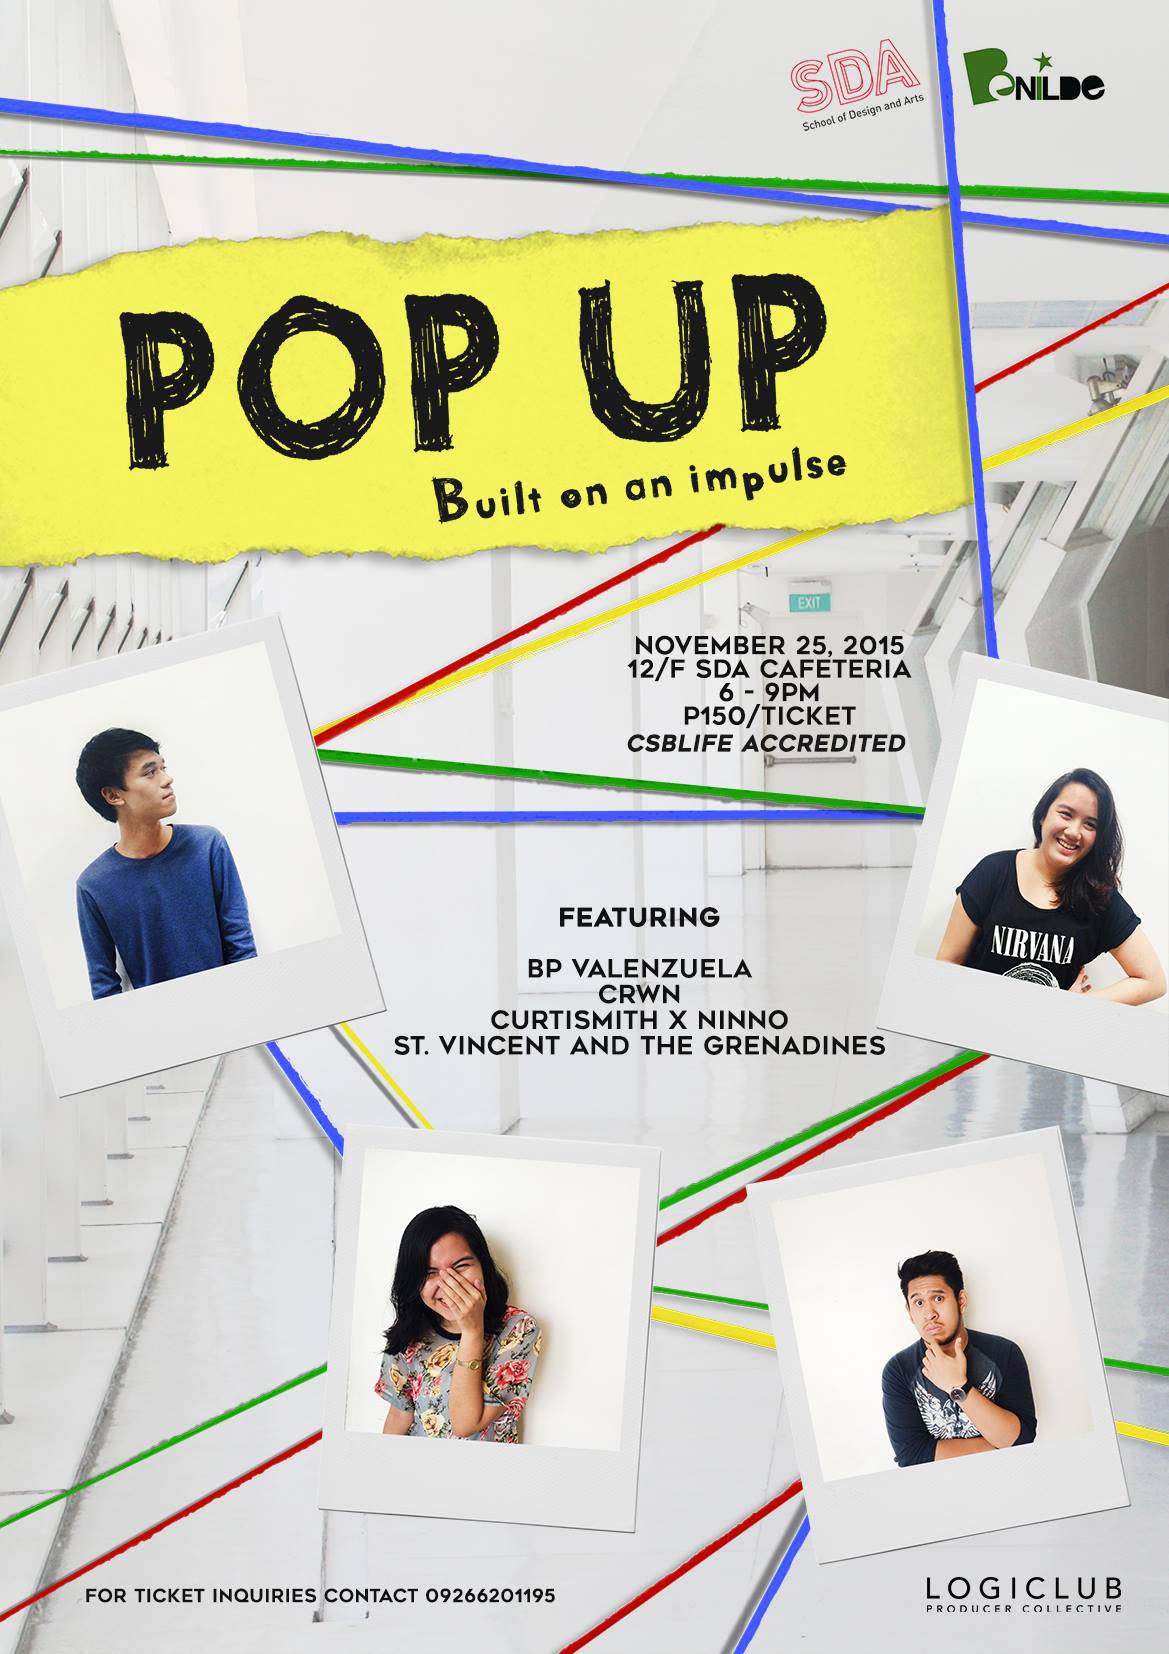 The Pop-Up Wednesday, November 25 at 6:00pm Tomorrow · 91°F / 74°F Partly Cloudy pin Show Map De La Salle - College Of St. Benilde SDA Campus Manila, Philippines ticket Find Tickets Tickets Available www.fb.com At 6 PM on November 25th at the 12/F SDA Caferteria, the De La Salle College of St. Benilde Arts Management Programs brings you the first ever Pop-Up with interactive art and music by some of Manila's sought after musicians under the LOGICLUB Producer Collective. Music By: BP Valenzuela CRWN NINNO St. Vincent and the Grenadines Doesn't matter who you are, where you're from, or what you did. Everyone is welcome to partake in The POP-UP only 150php for a ticket. Feel Free to Call or Text 09266201195 for inquiries and additional information.